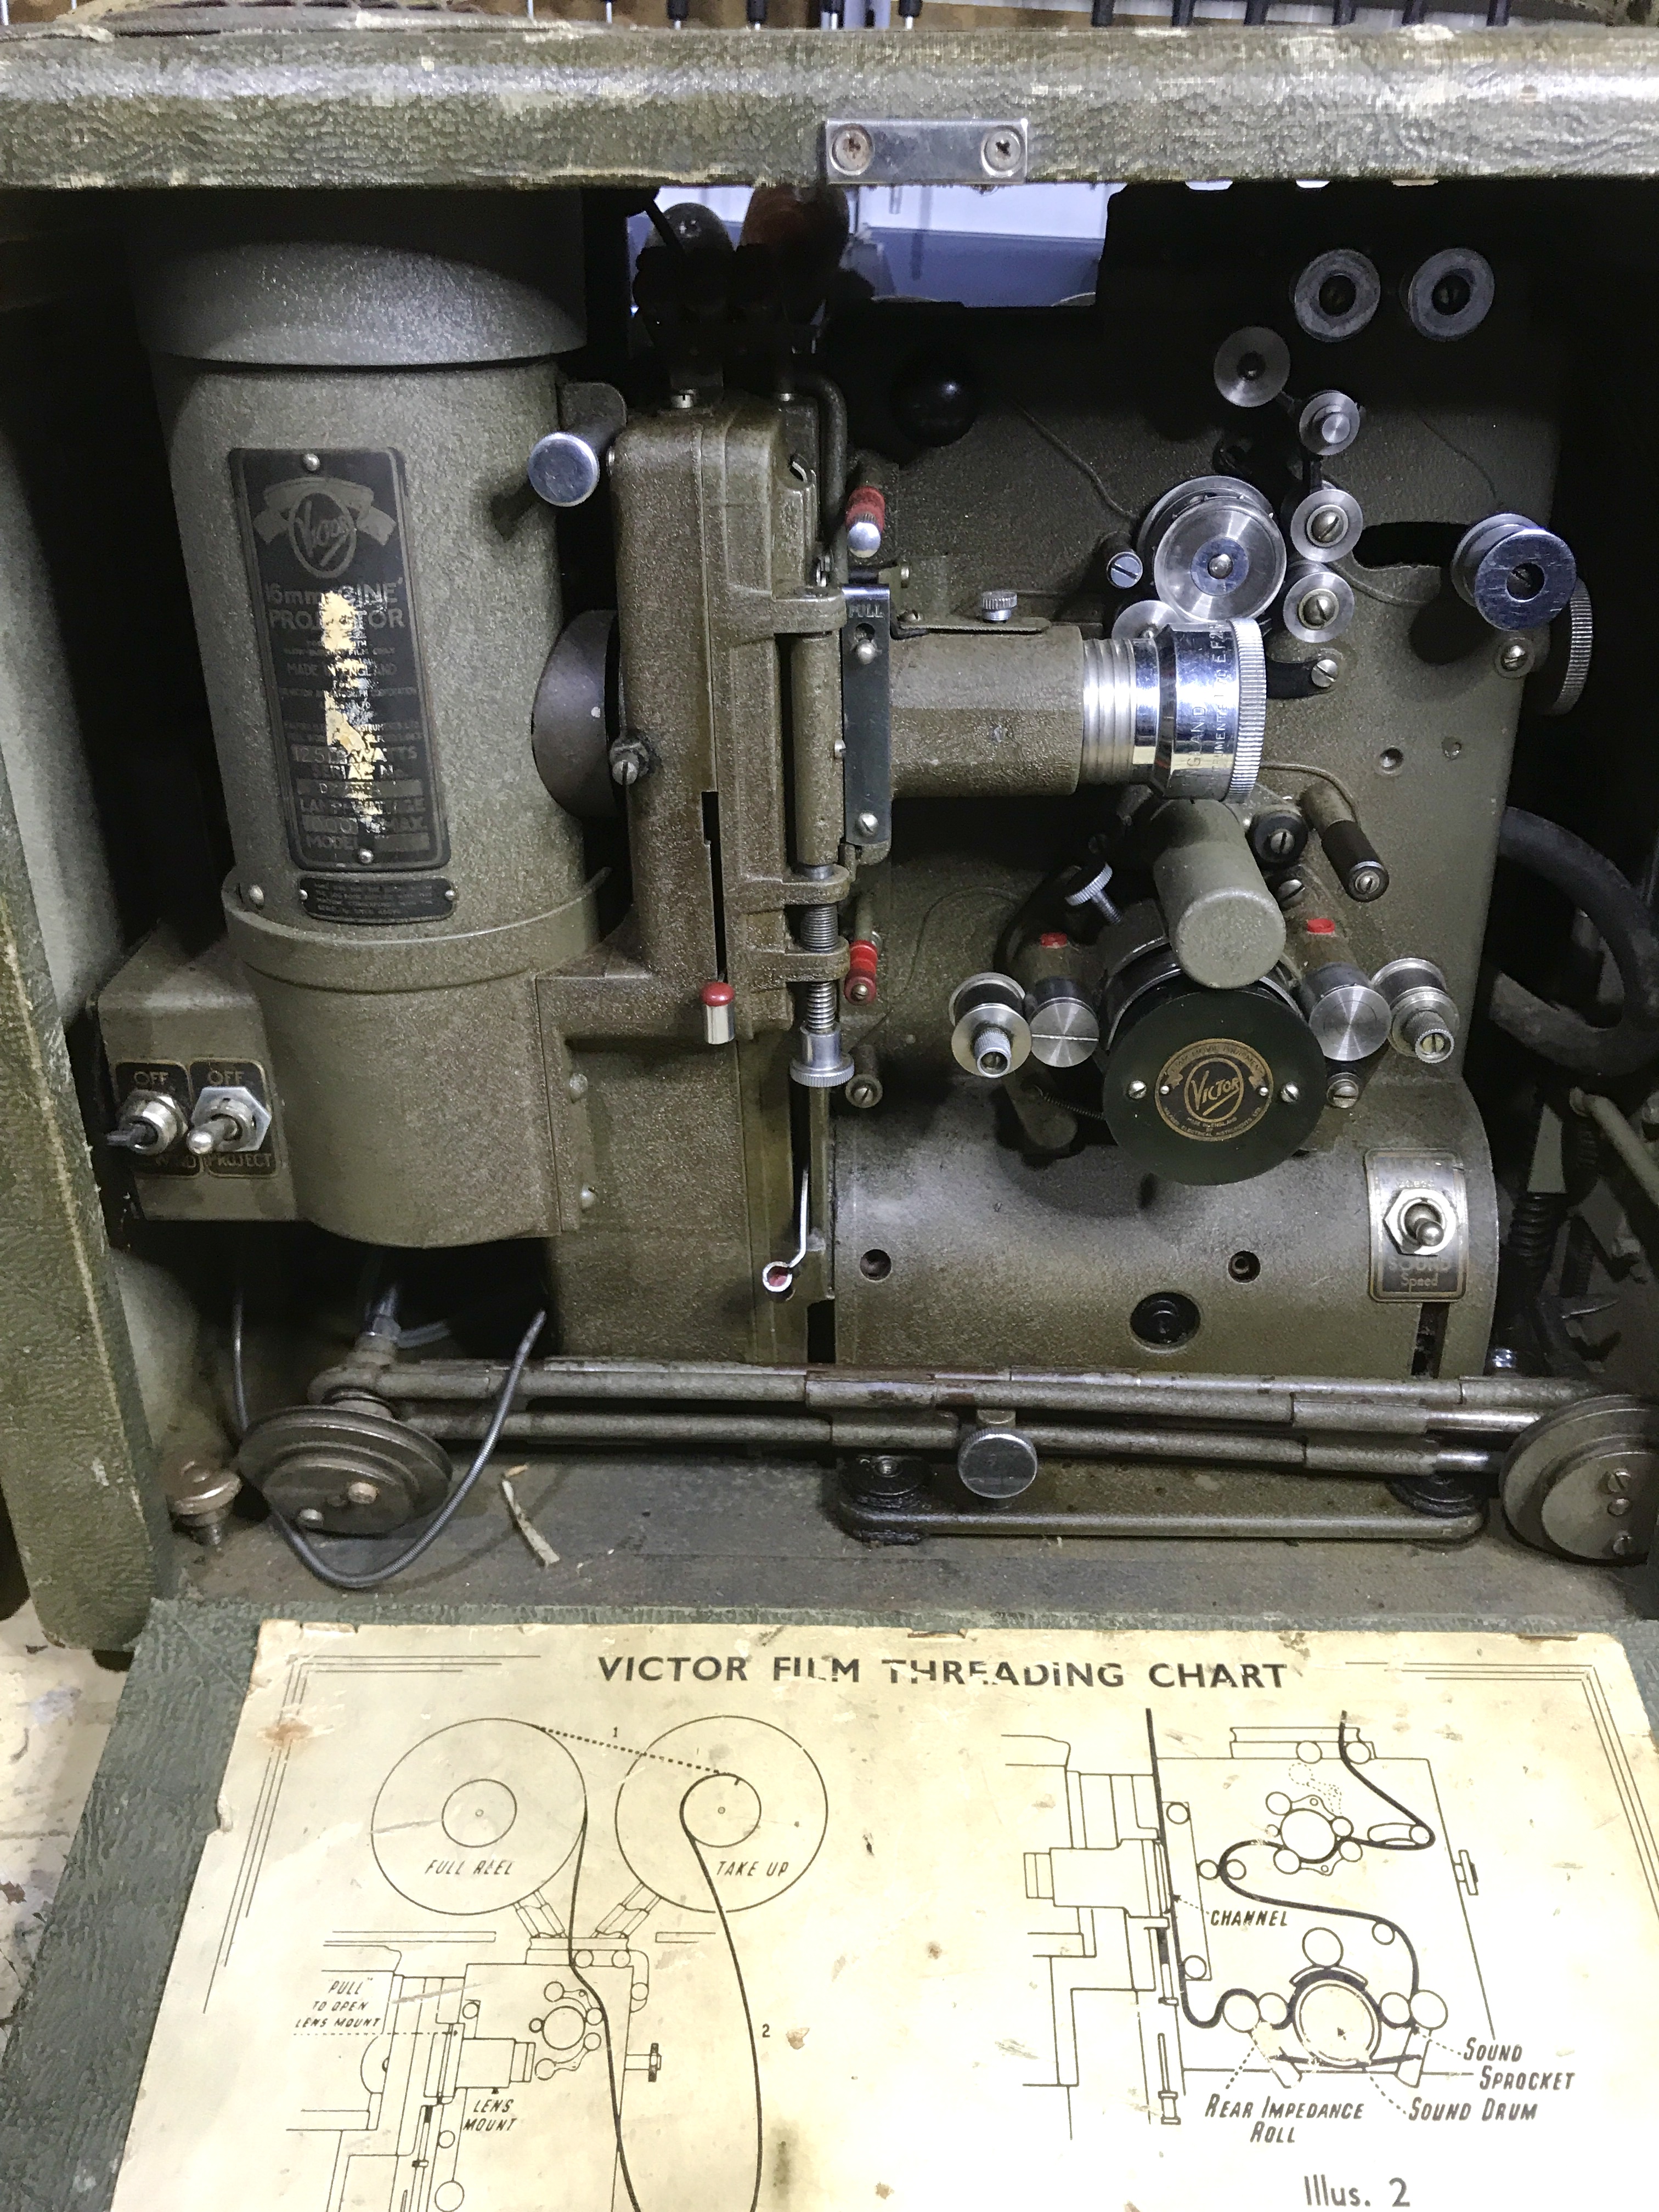 Victor 16mm projector